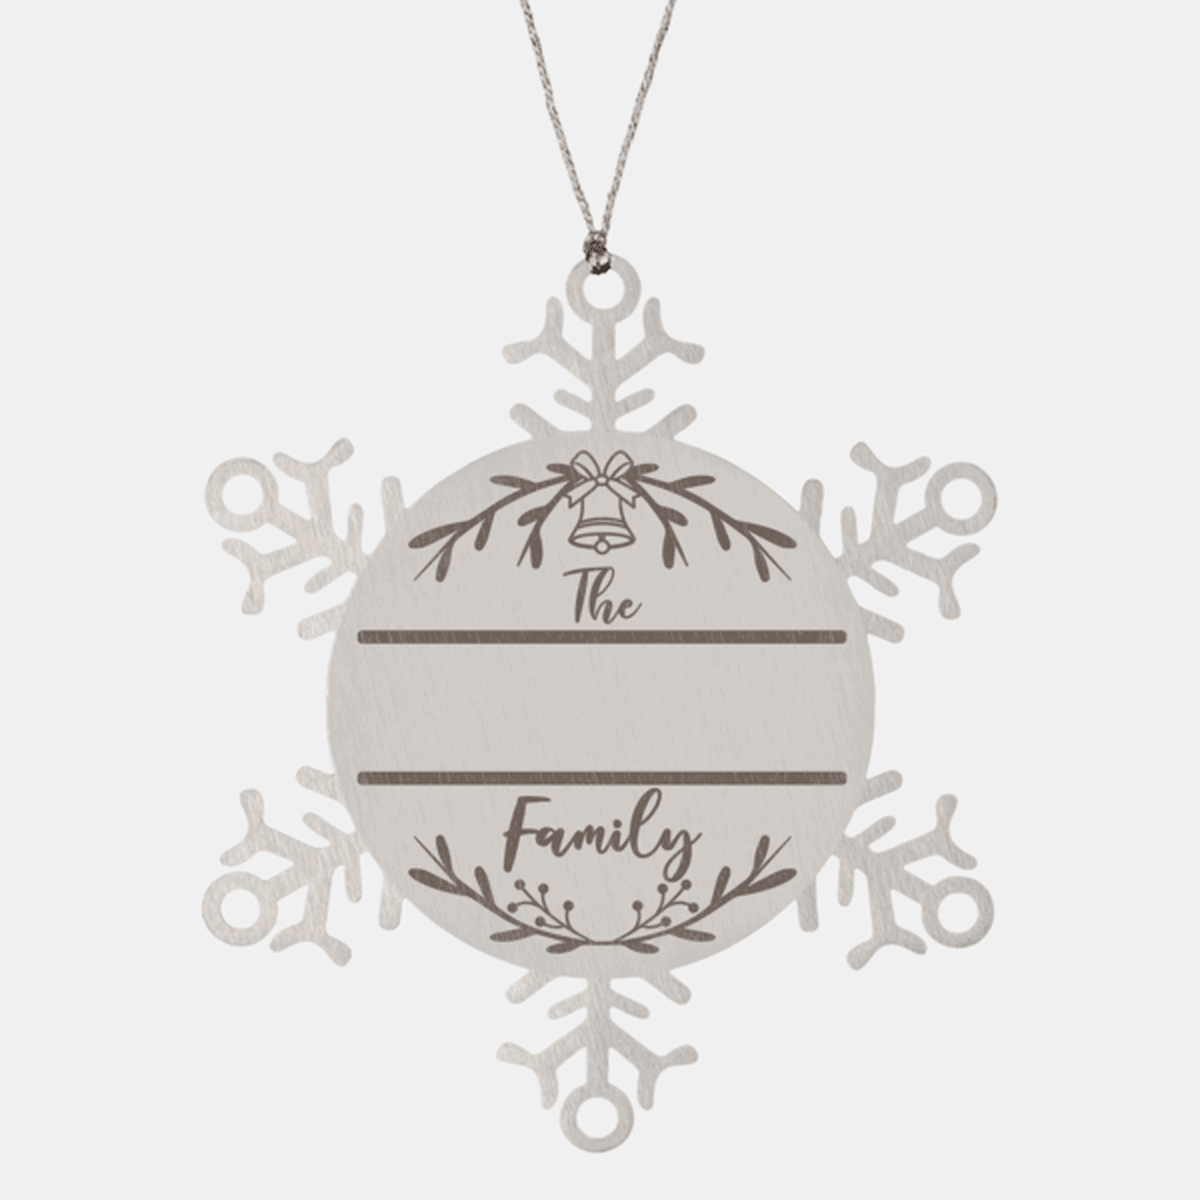 Personalized Snowflake Family Name Laser Engraved Stainless Steel Tree Ornament - Mallard Moon Gift Shop